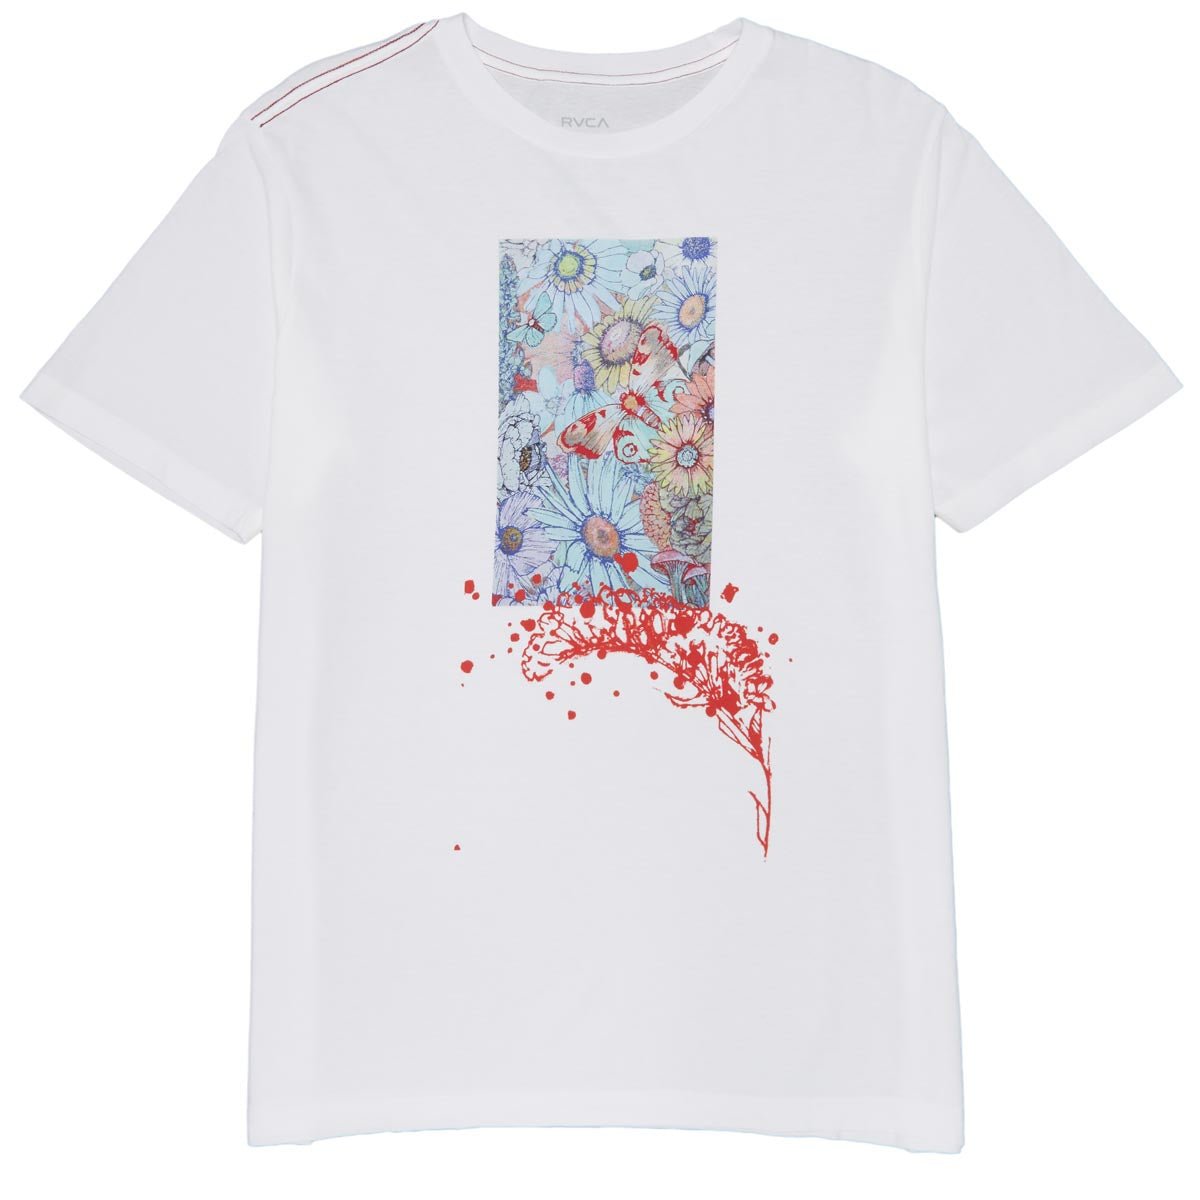 RVCA Cropped Flower T-Shirt - Antique White image 1